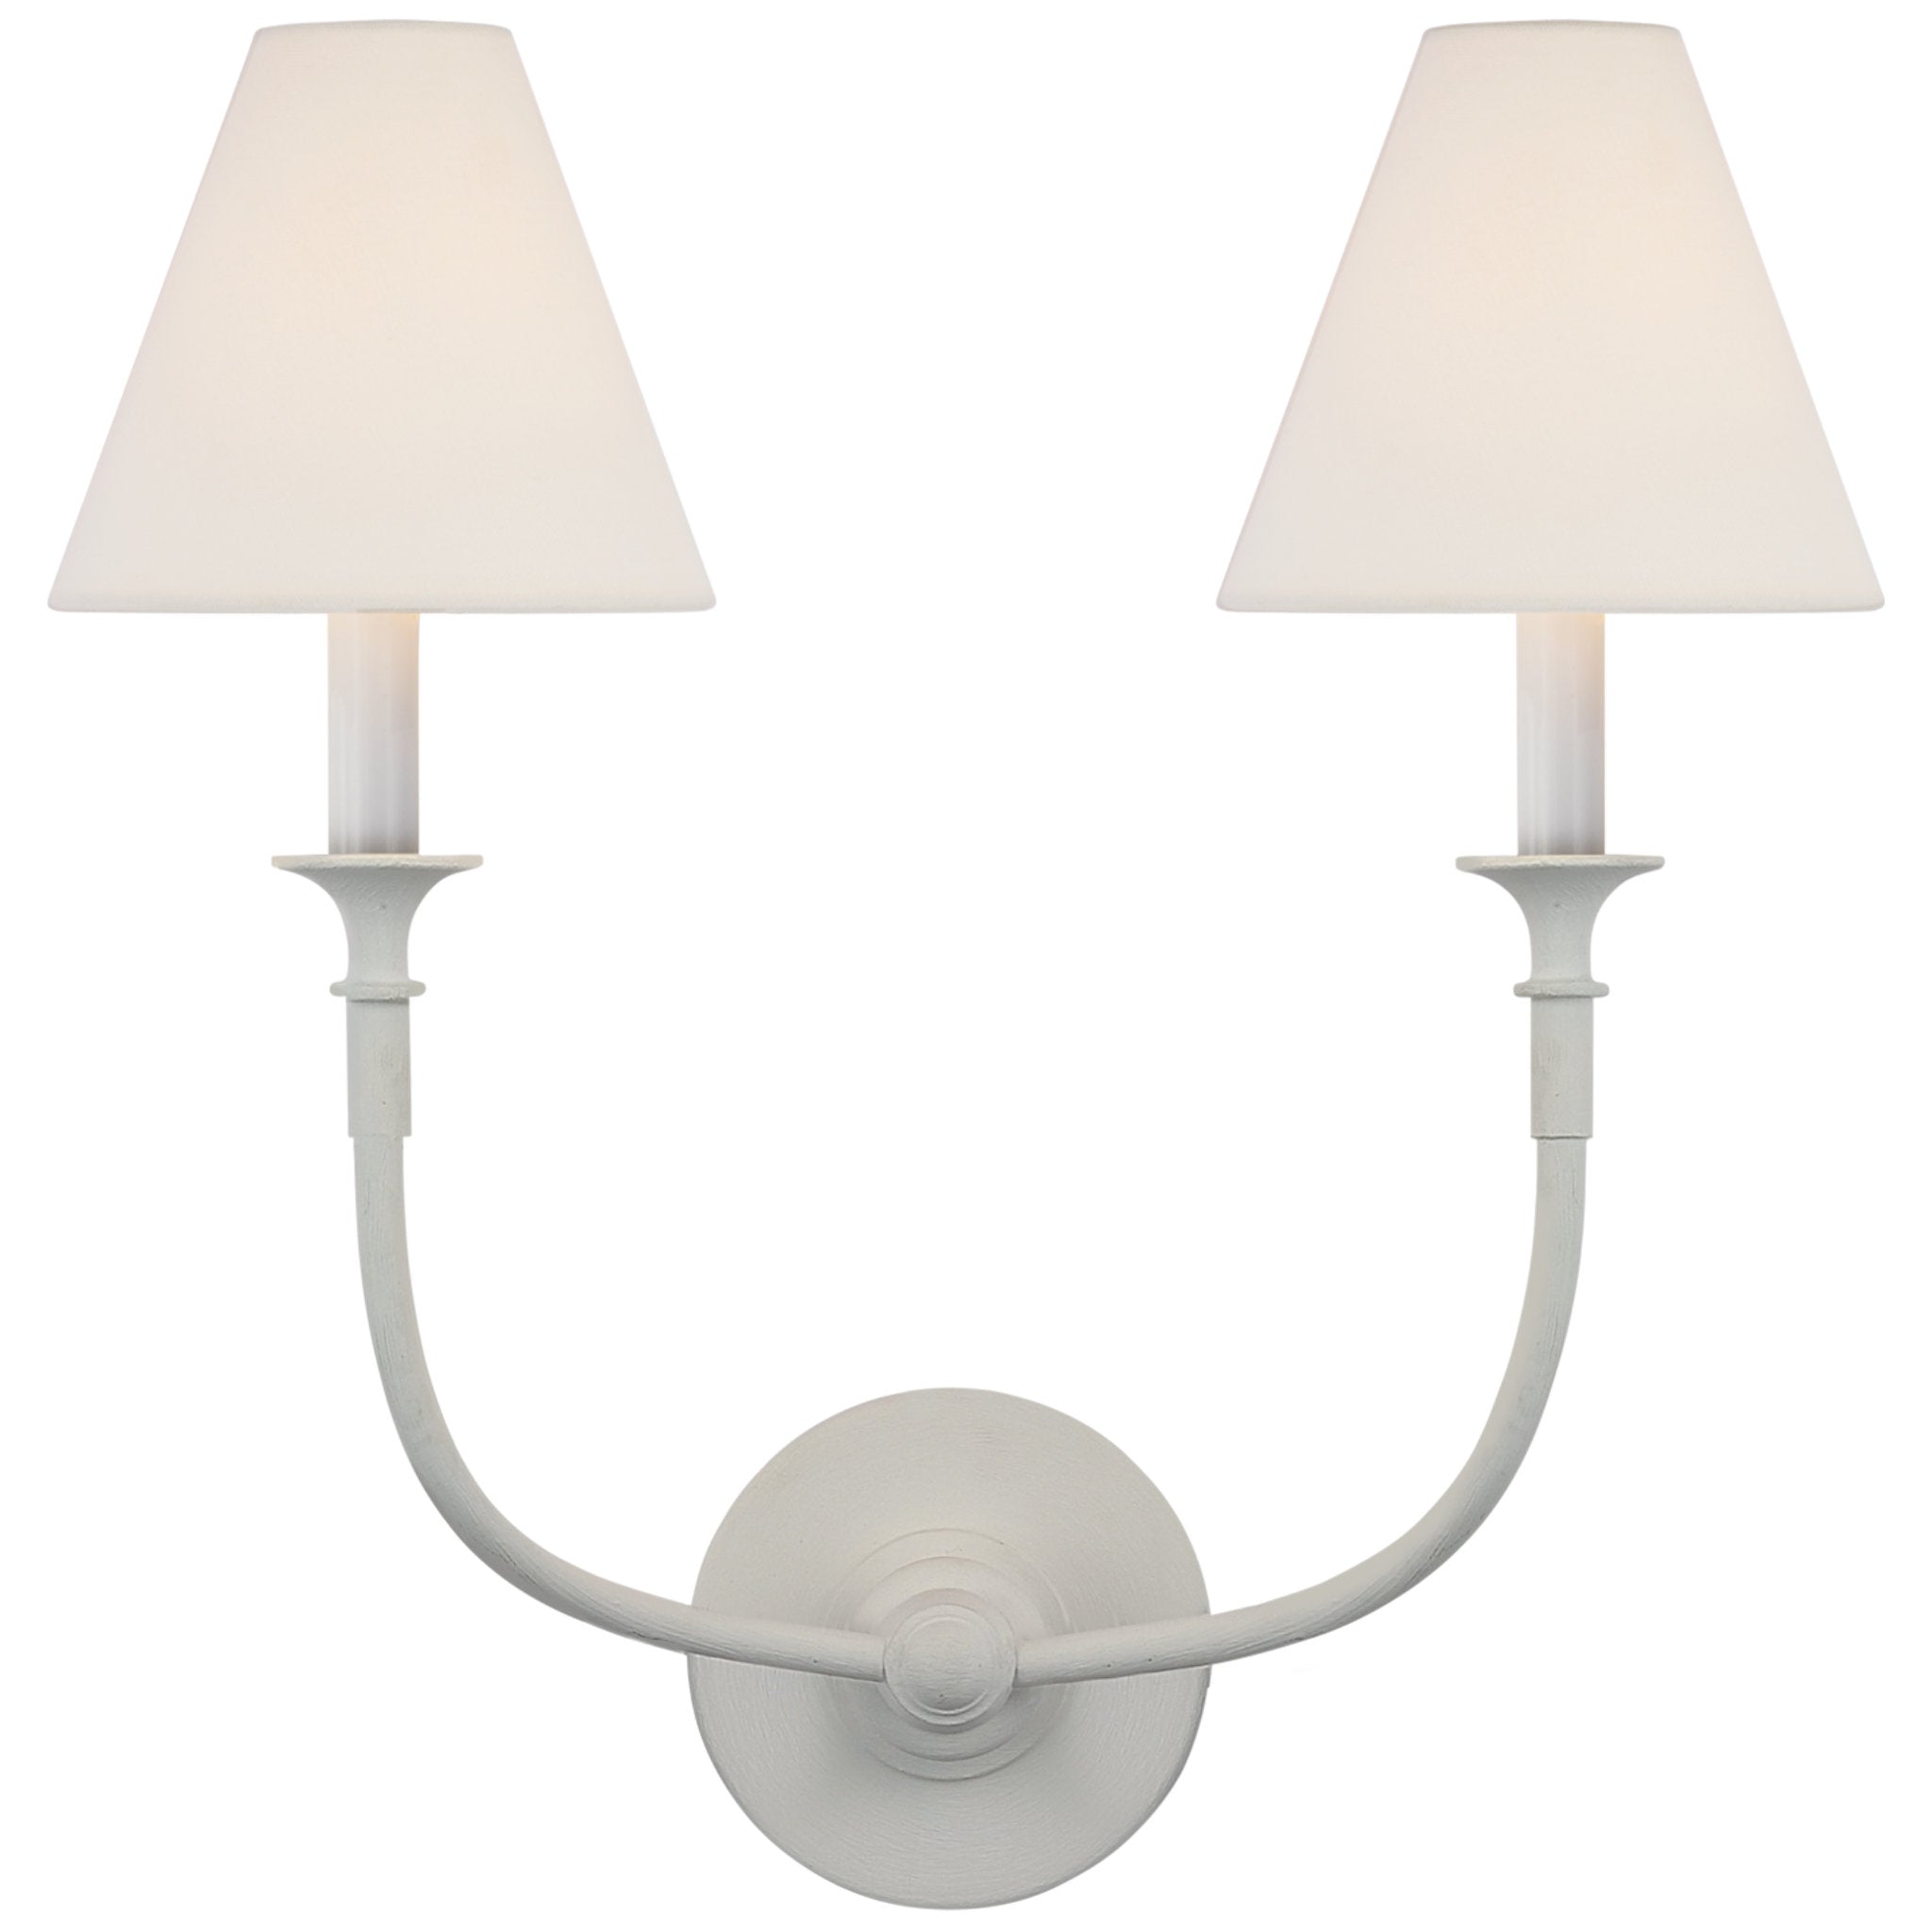 Thomas O'Brien Piaf Double Sconce in Plaster White with Linen Shades